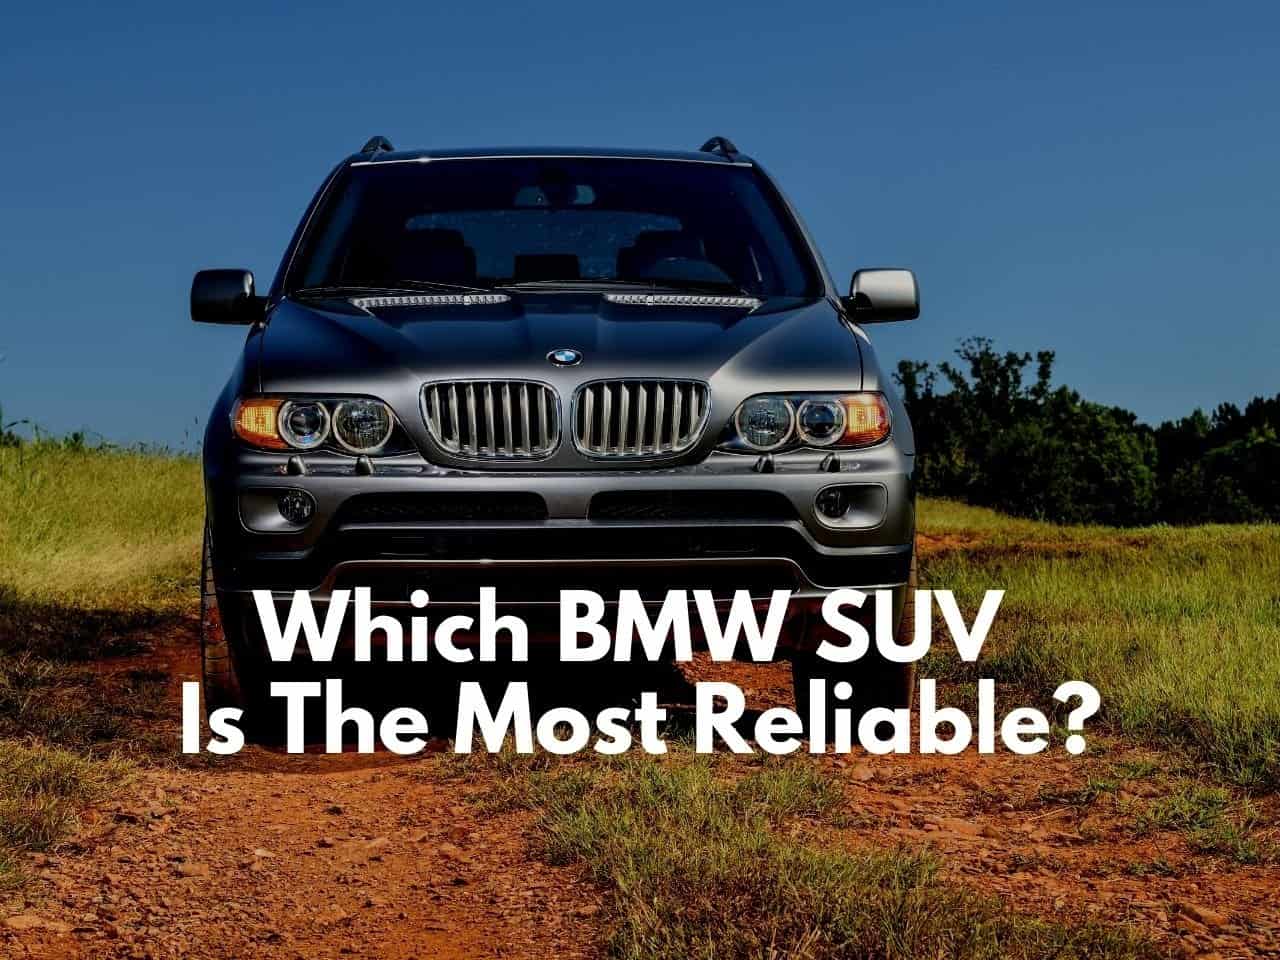 Which BMW SUV Is The Most Reliable Which Used BMW SUV is the Most Reliable?